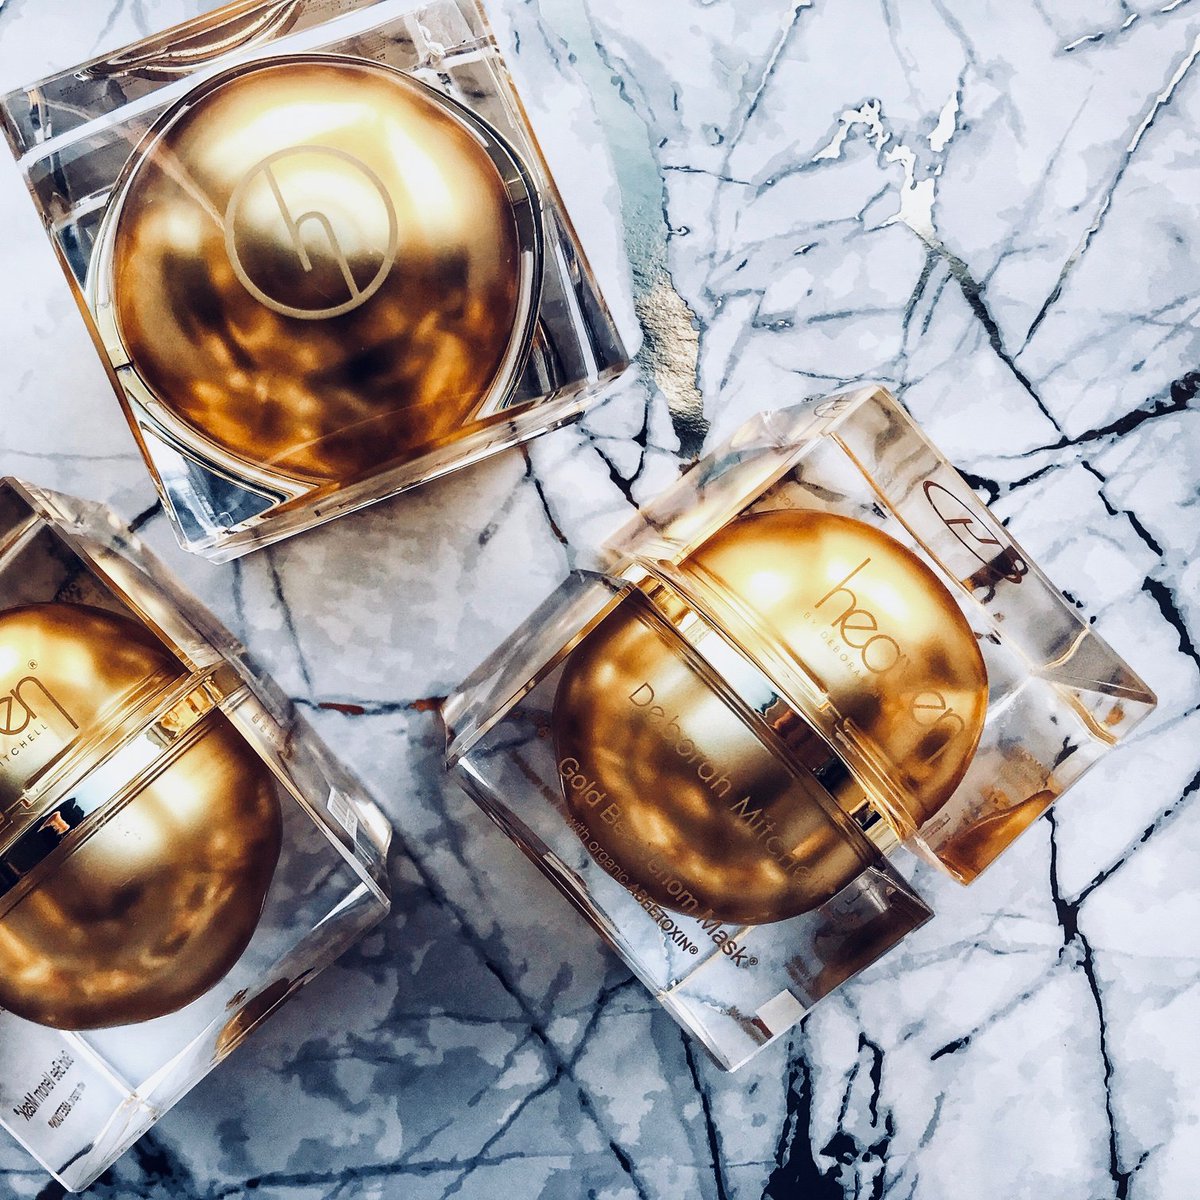 The pinnacle of skincare: the Gold Bee Venom mask is a revolutionary organic cream that works to control the facial muscles for tightening, firming & lifting; whilst penetrating fine lines. It contains the world’s rarest bee venom; only 500 are made a year
ow.ly/zHYf50FxgiZ